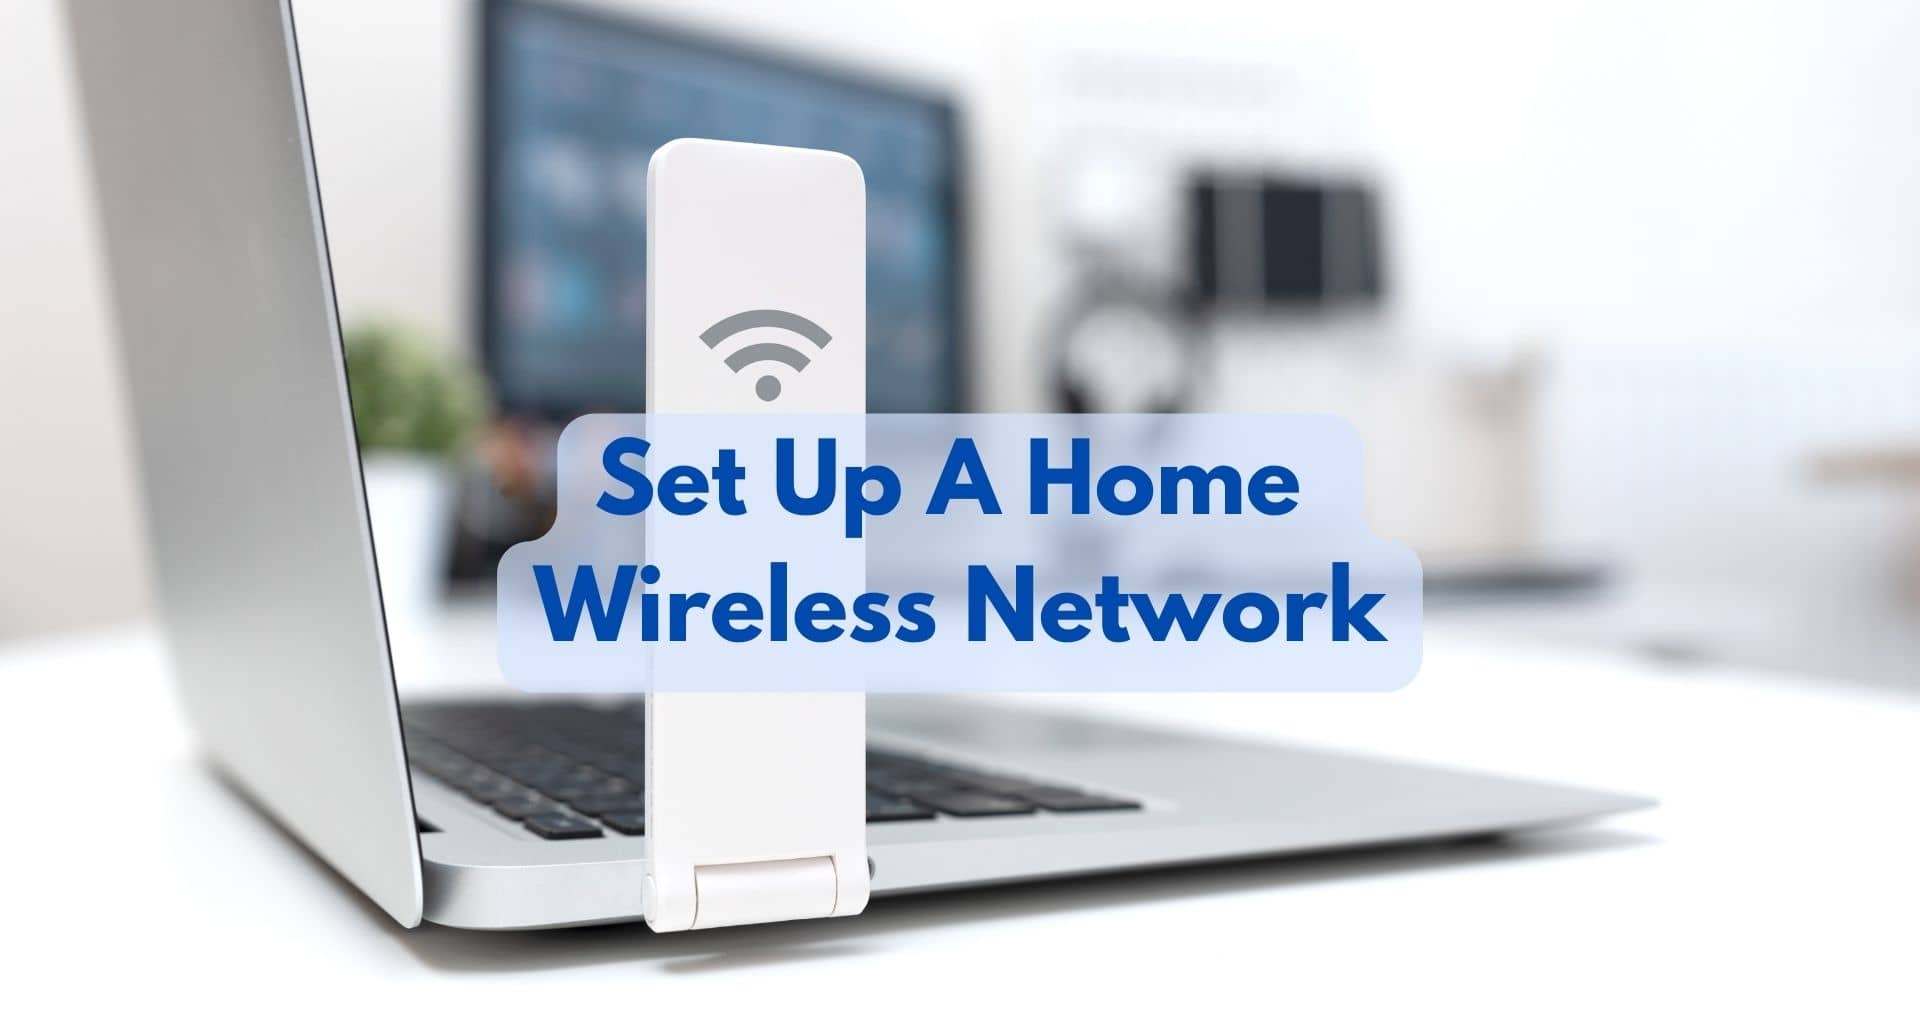 What Are The Essential Steps To Set Up A Home Wireless Network?